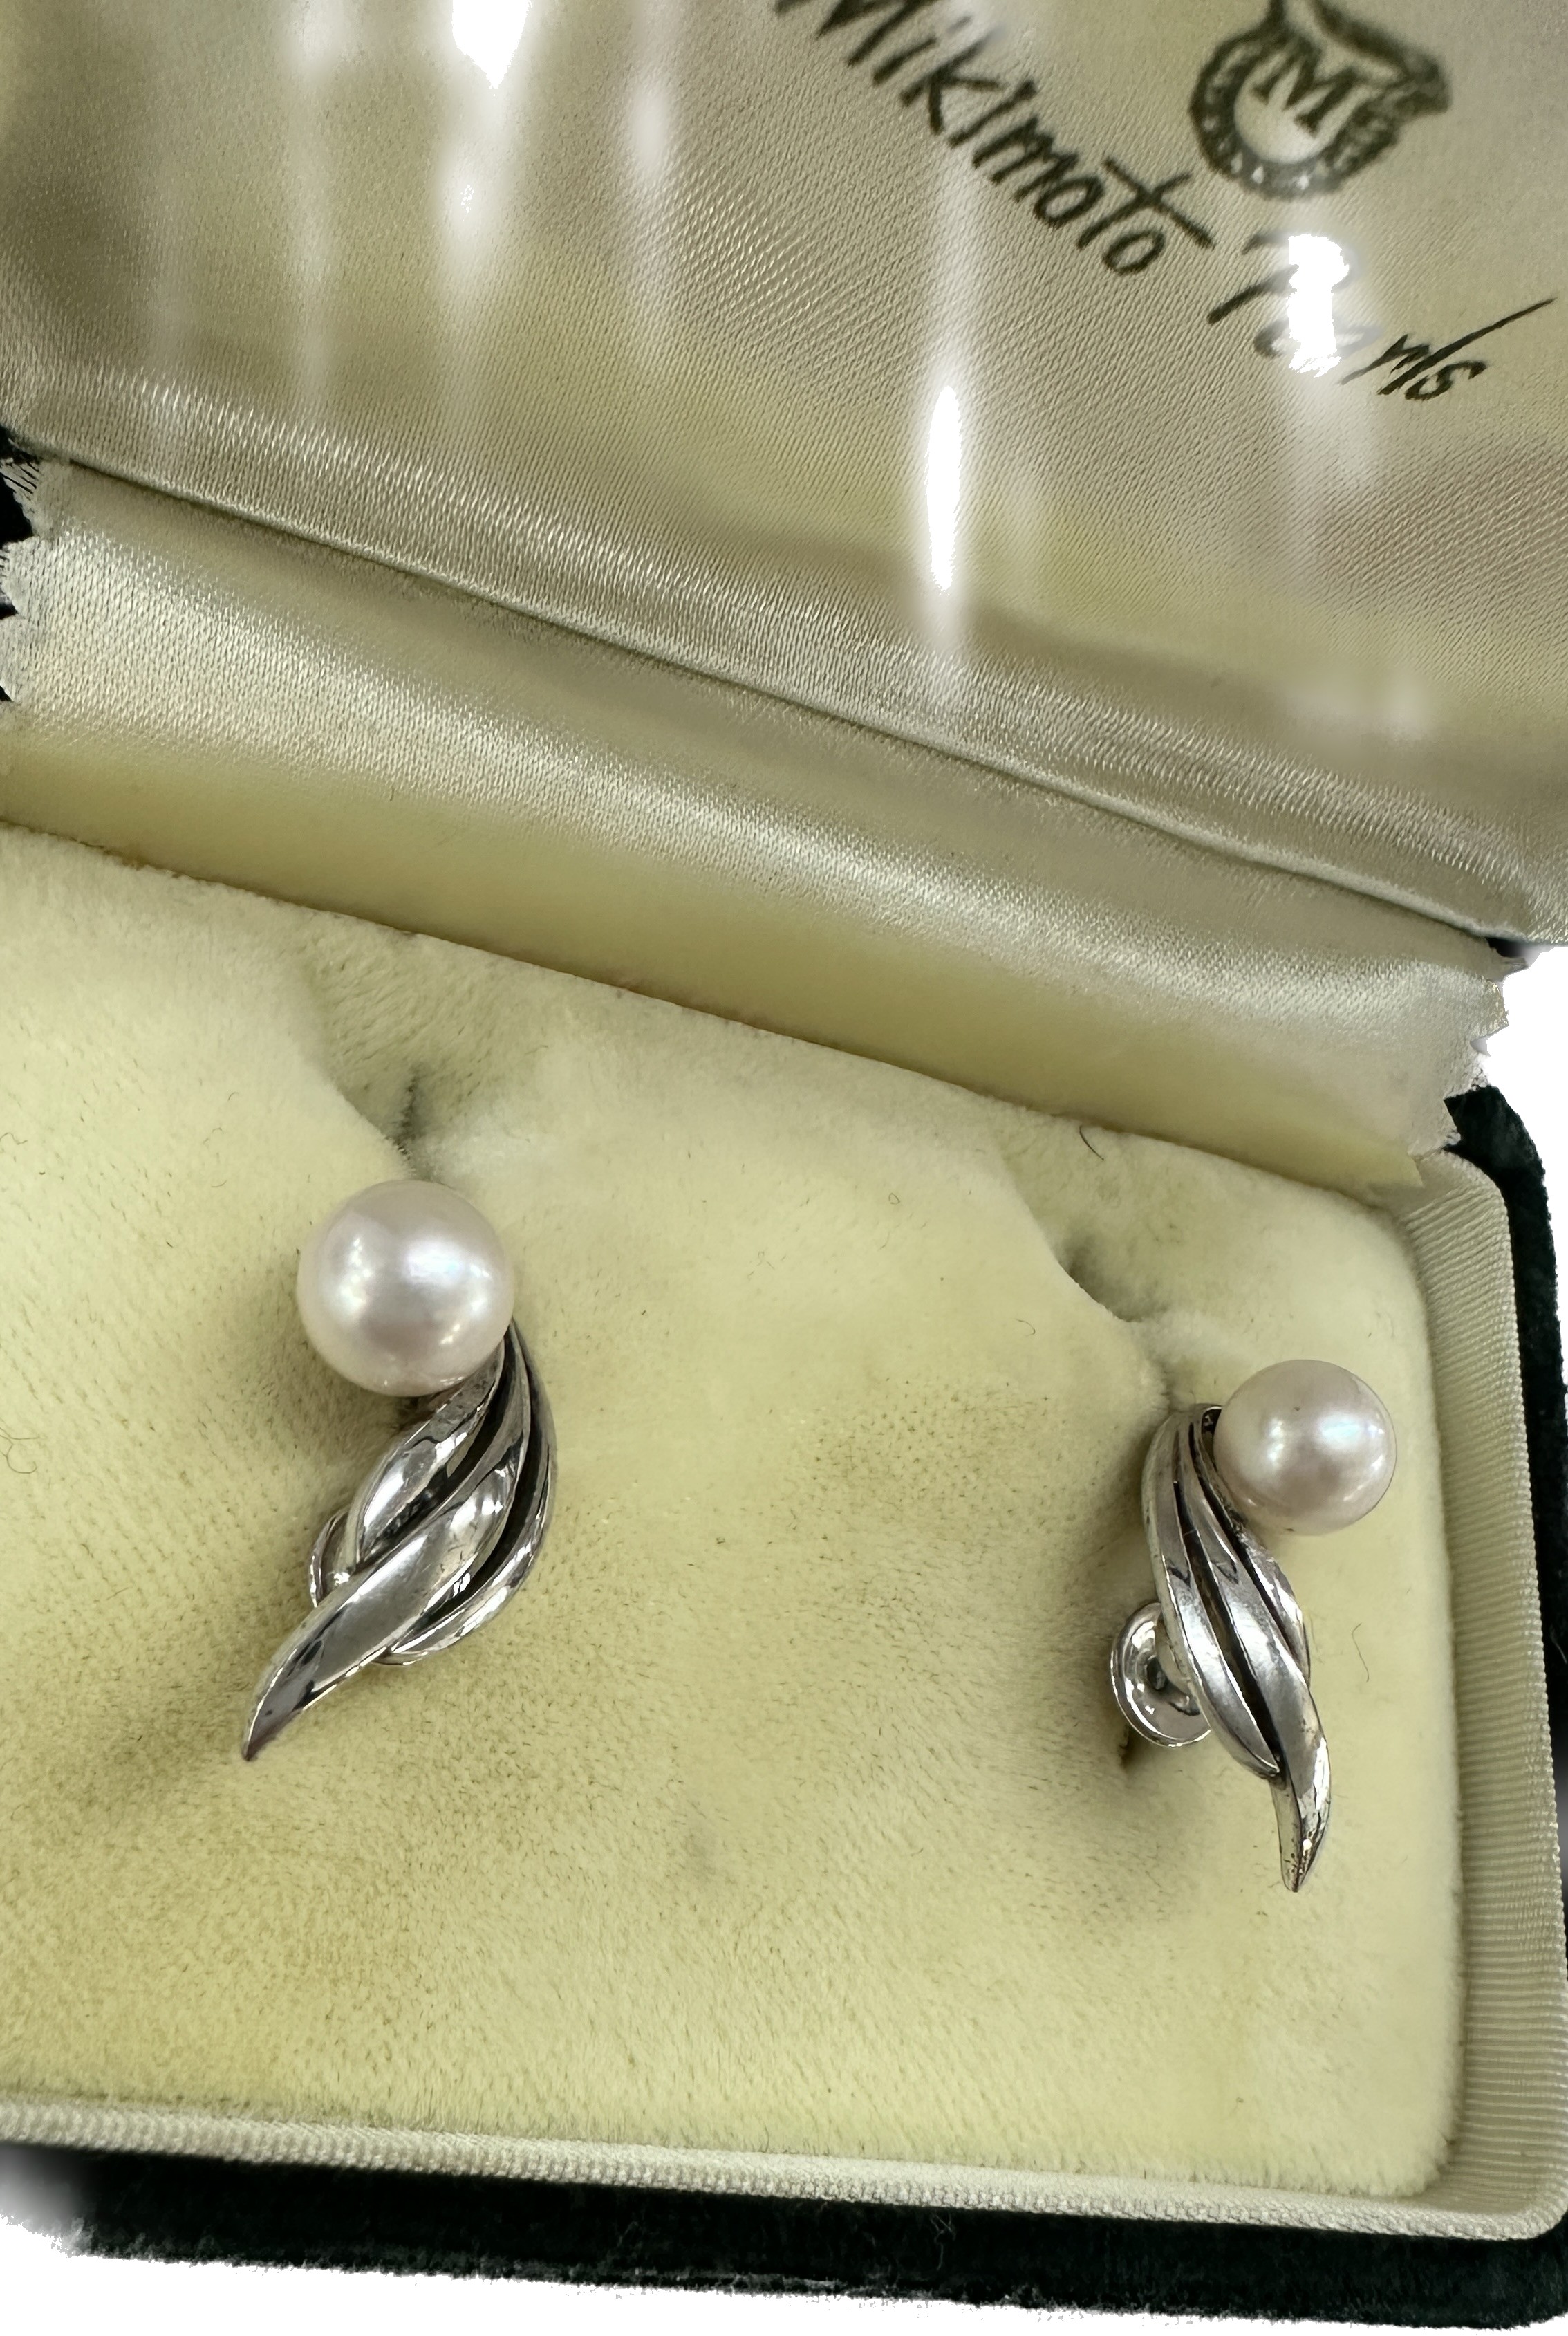 Vintage sterling silver Mikimoto pearl earrings in original box - Image 2 of 3